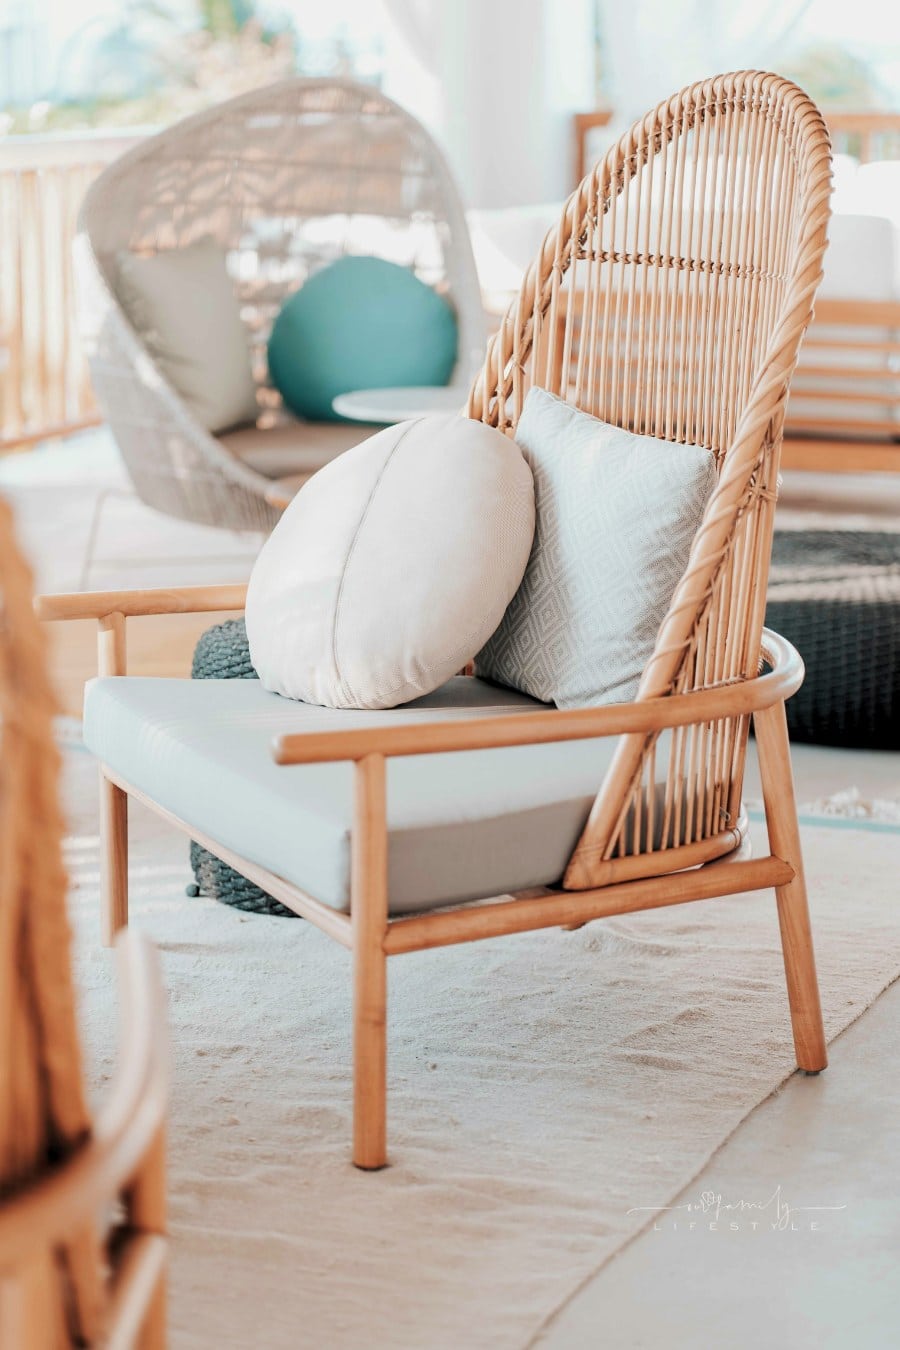 Wicker Armchair With Pillows on outdoor patio